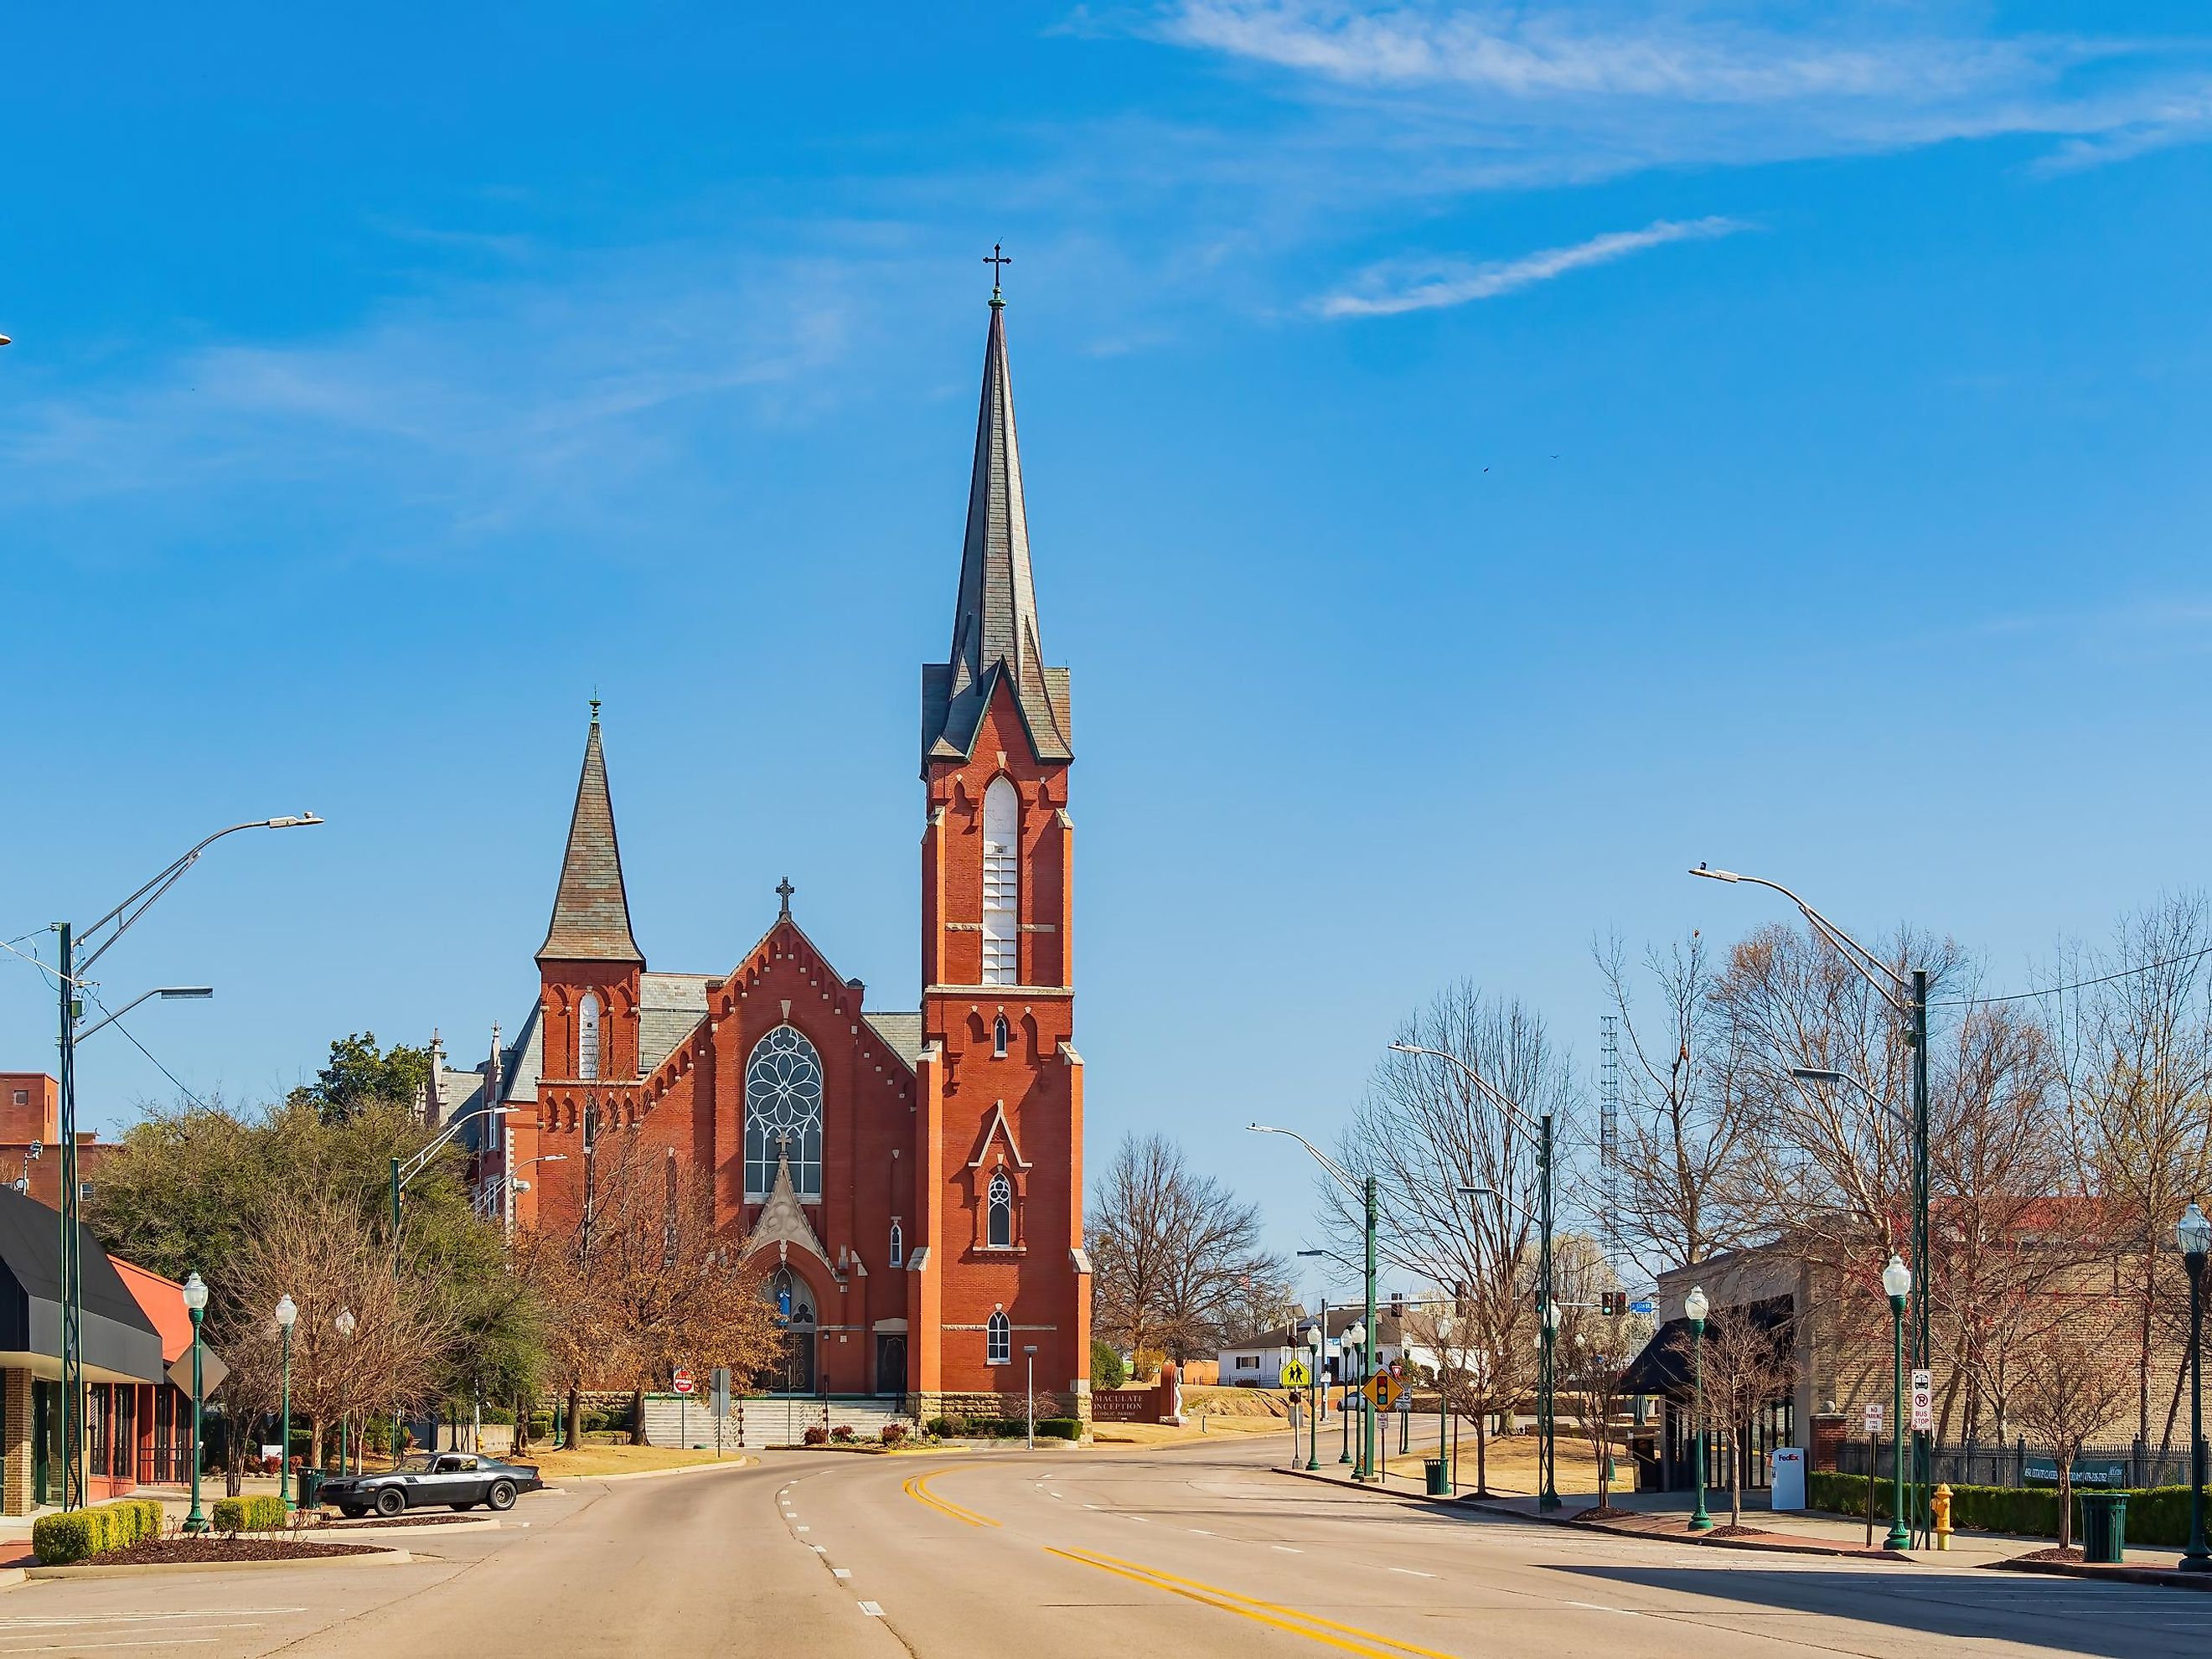 Sunny view of the Immaculate Conception Church in Fort Smith, Arkansas.